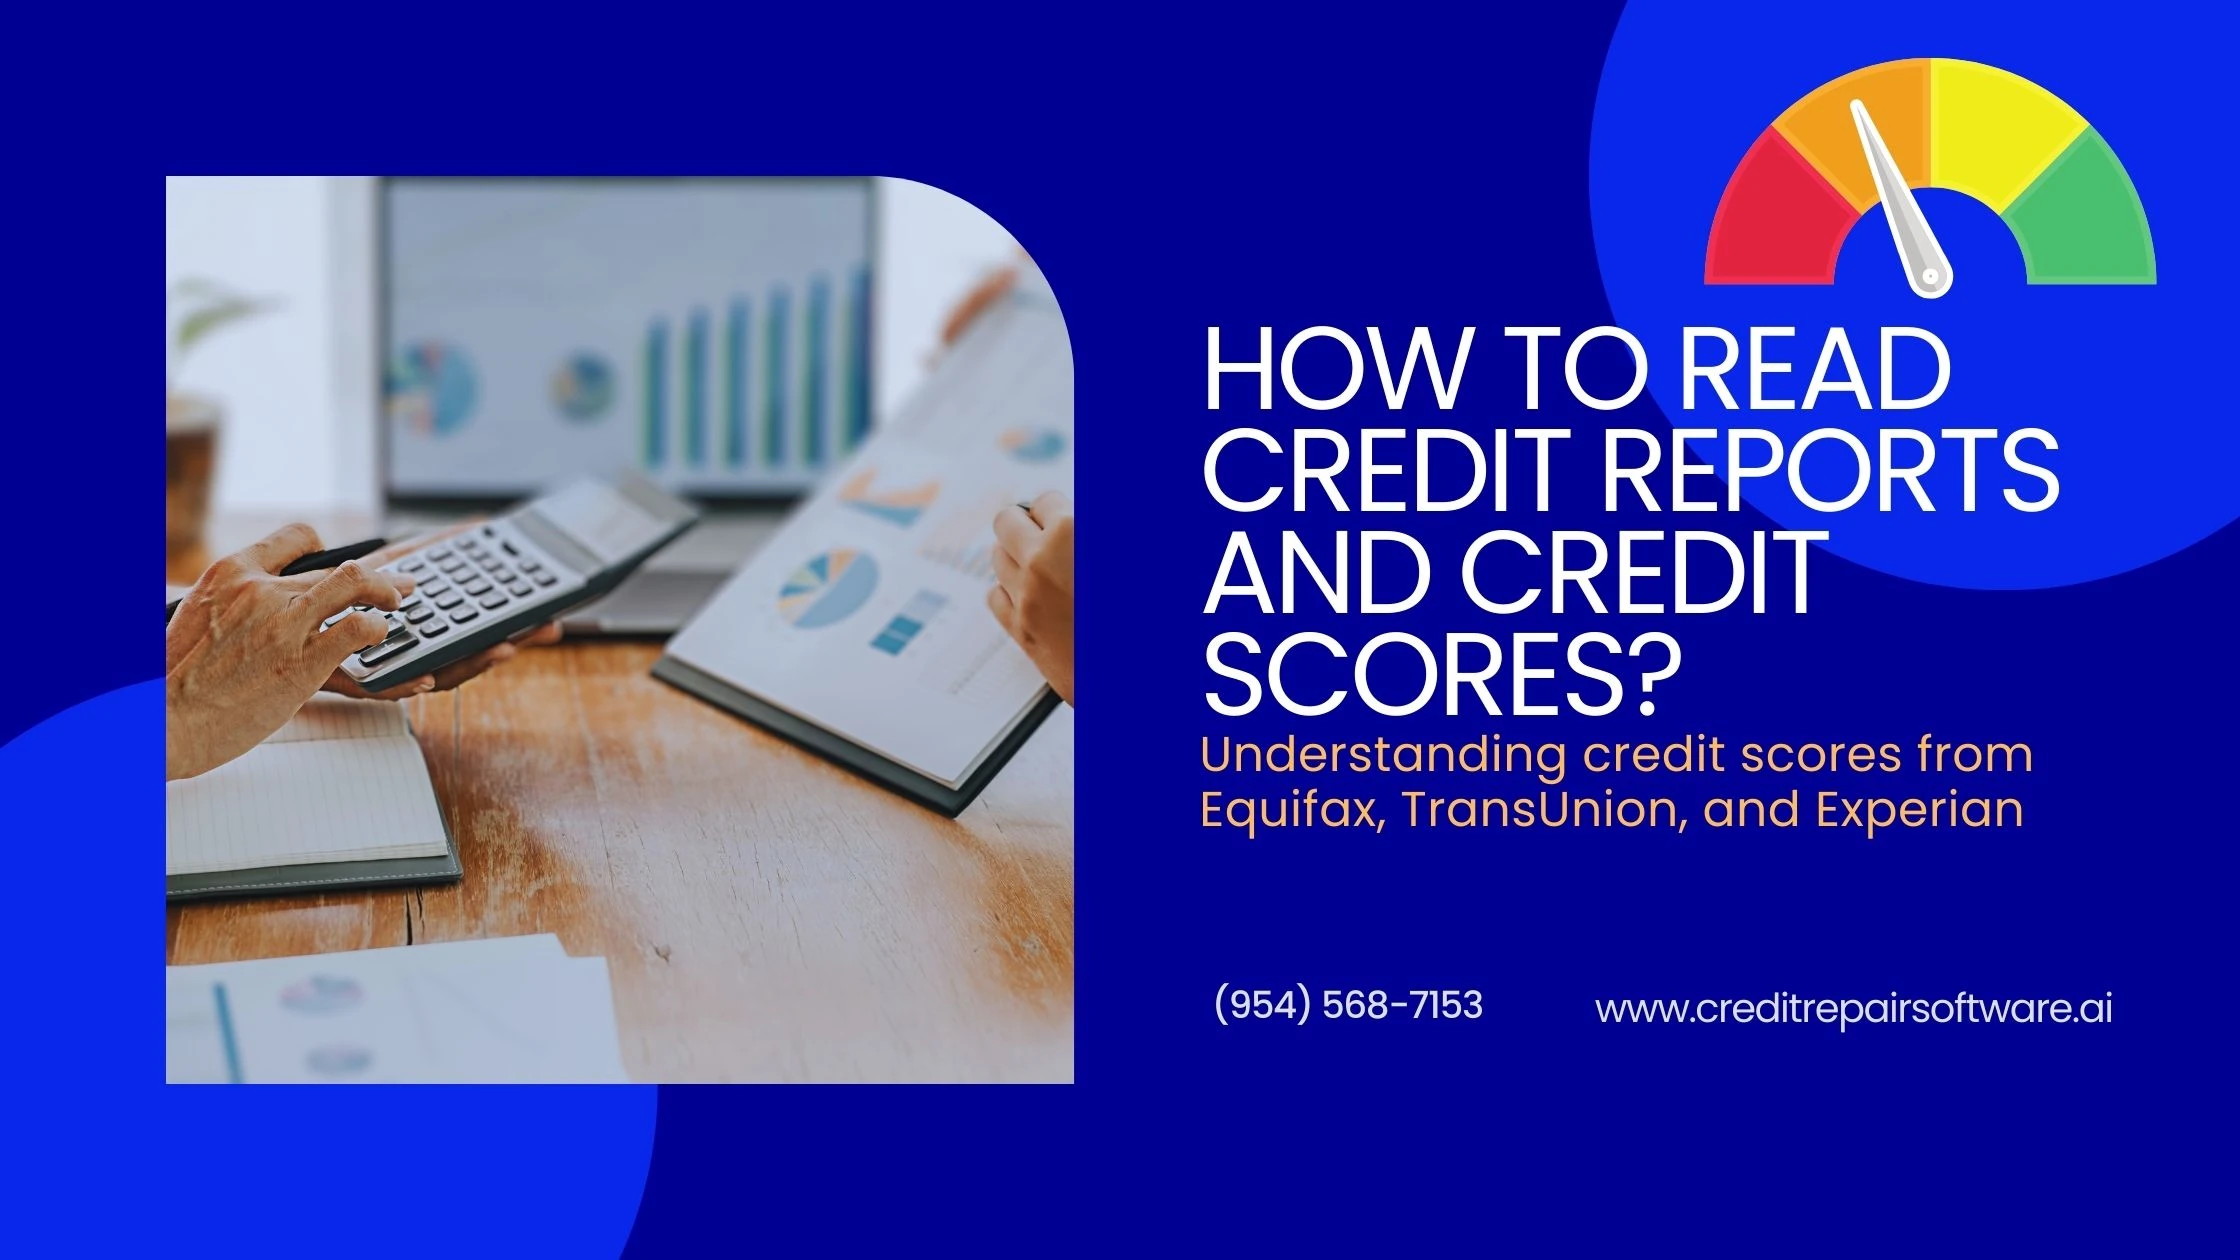 How to Read Credit Reports and Credit Scores